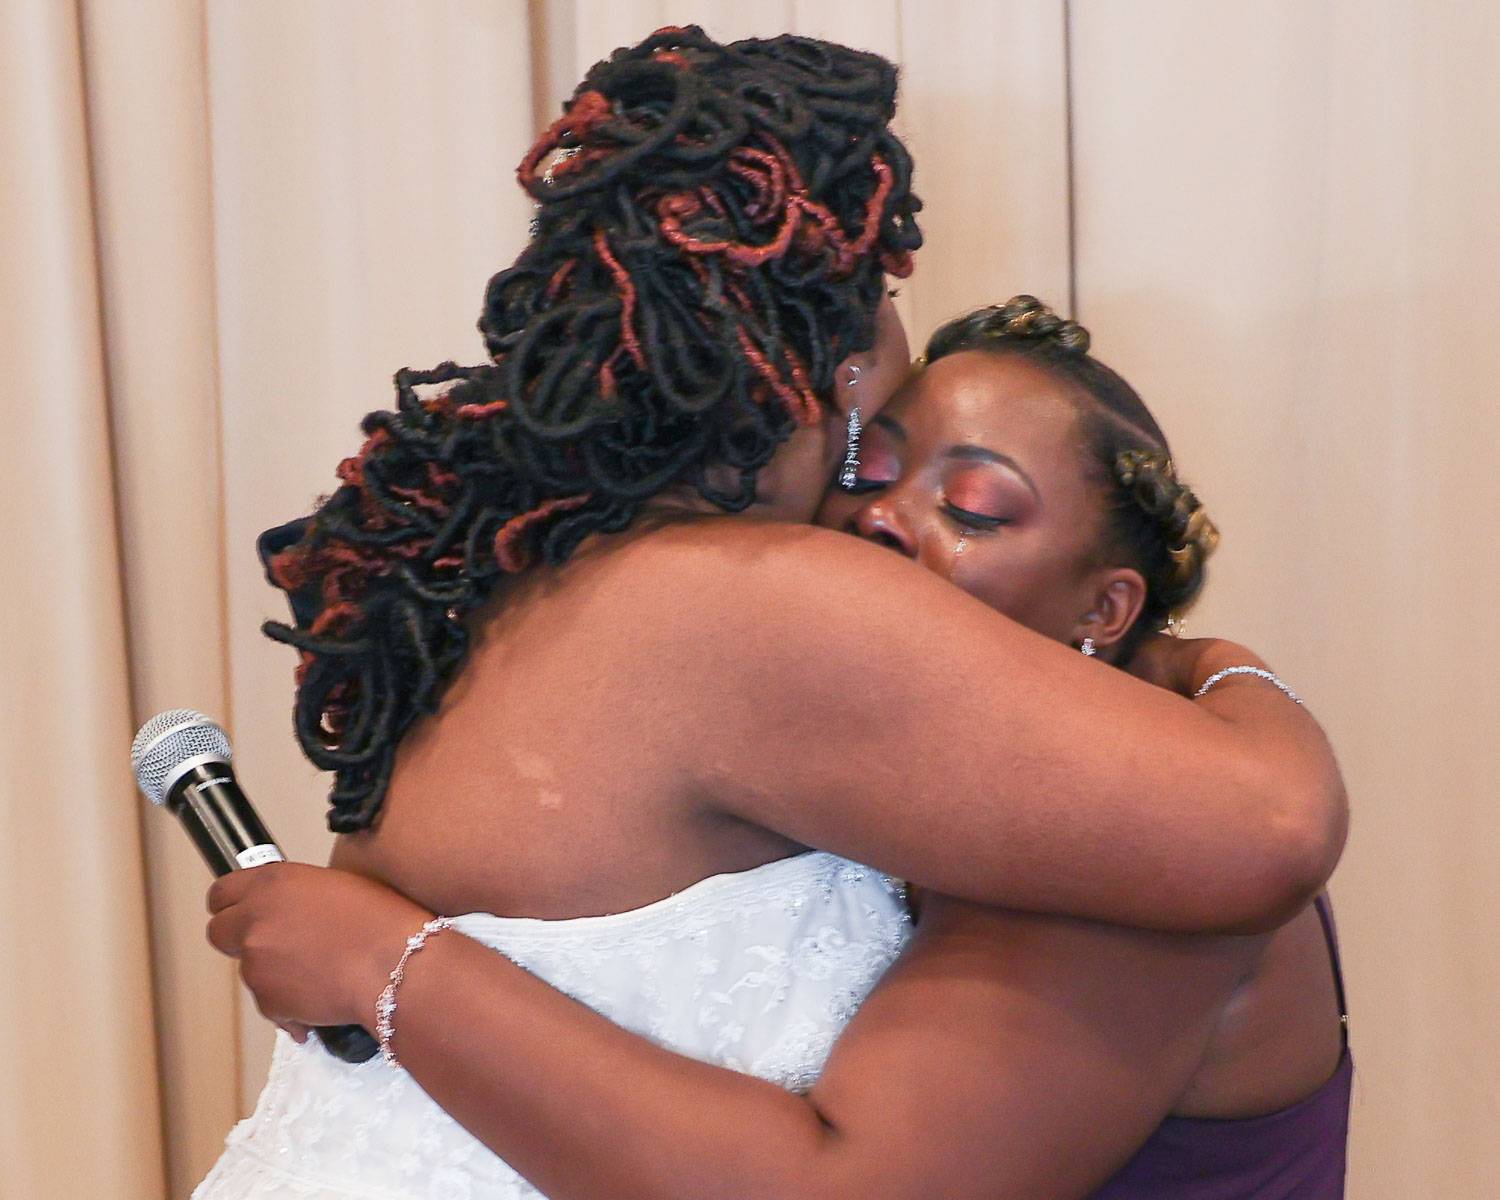 The bride and her friend hug